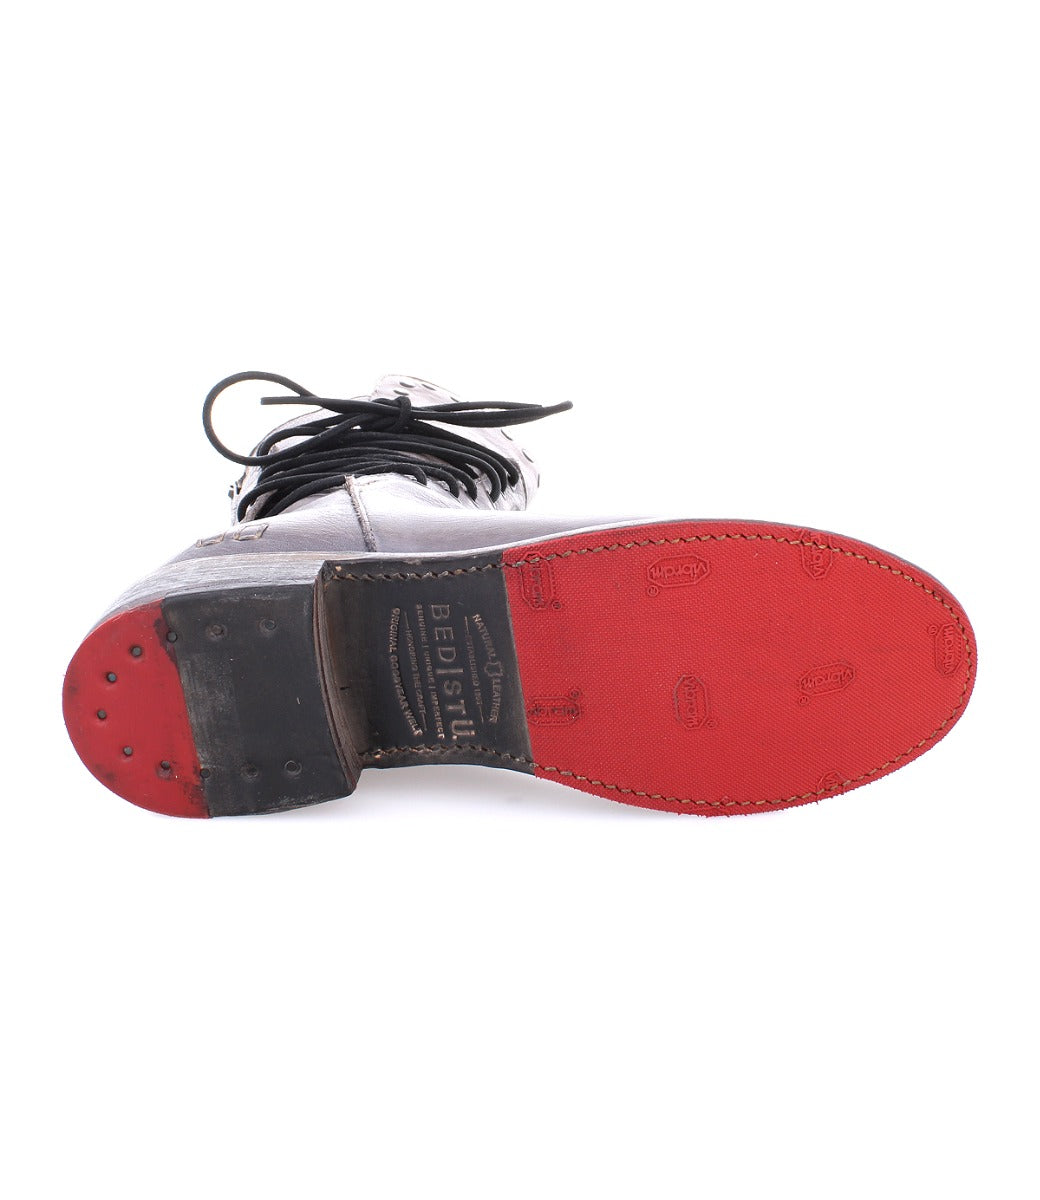 A pair of Fen shoes with red soles and a white sole from Bed Stu.